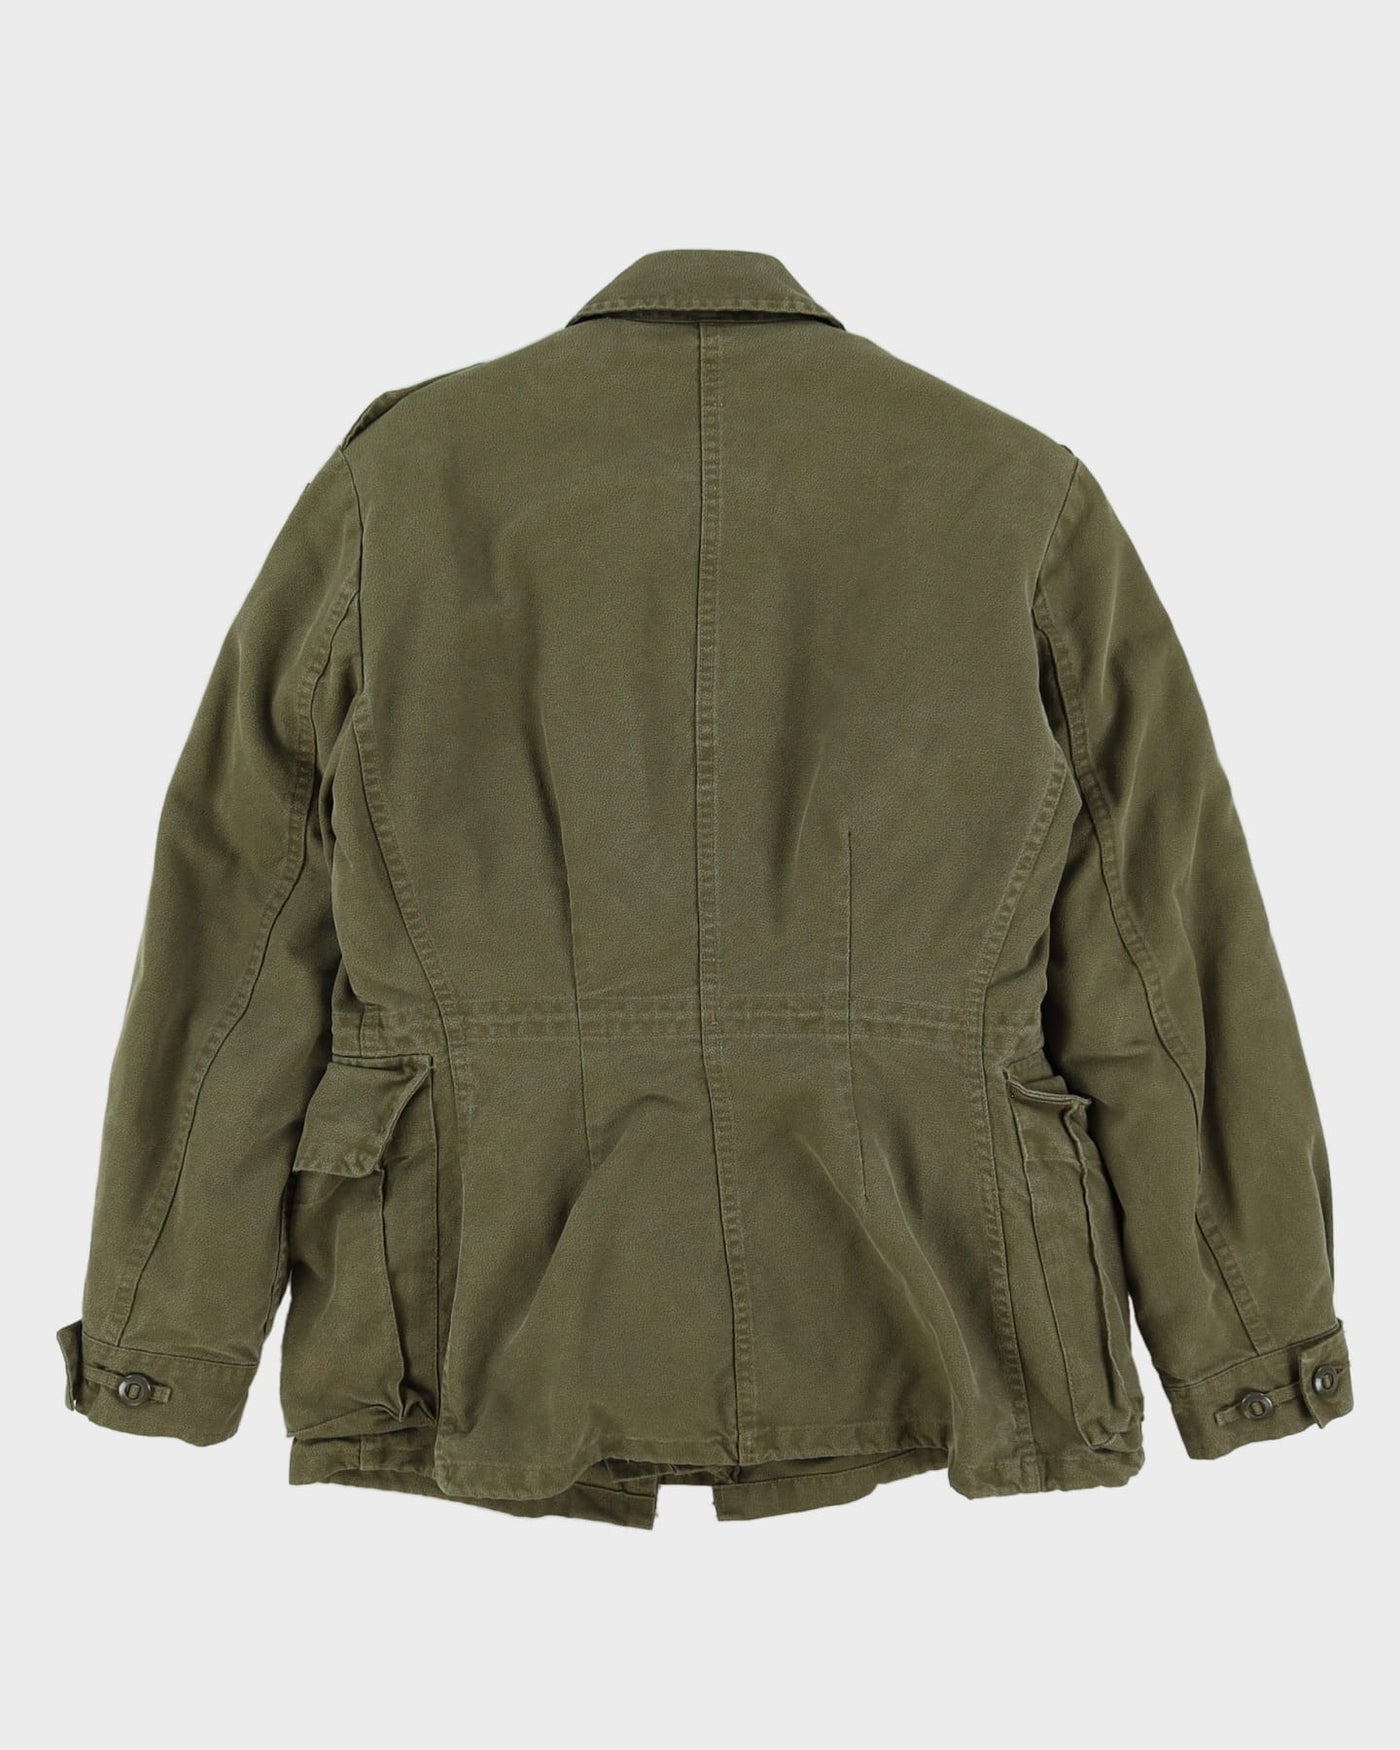 90s Vintage Canadian Army GS Field Jacket - Small